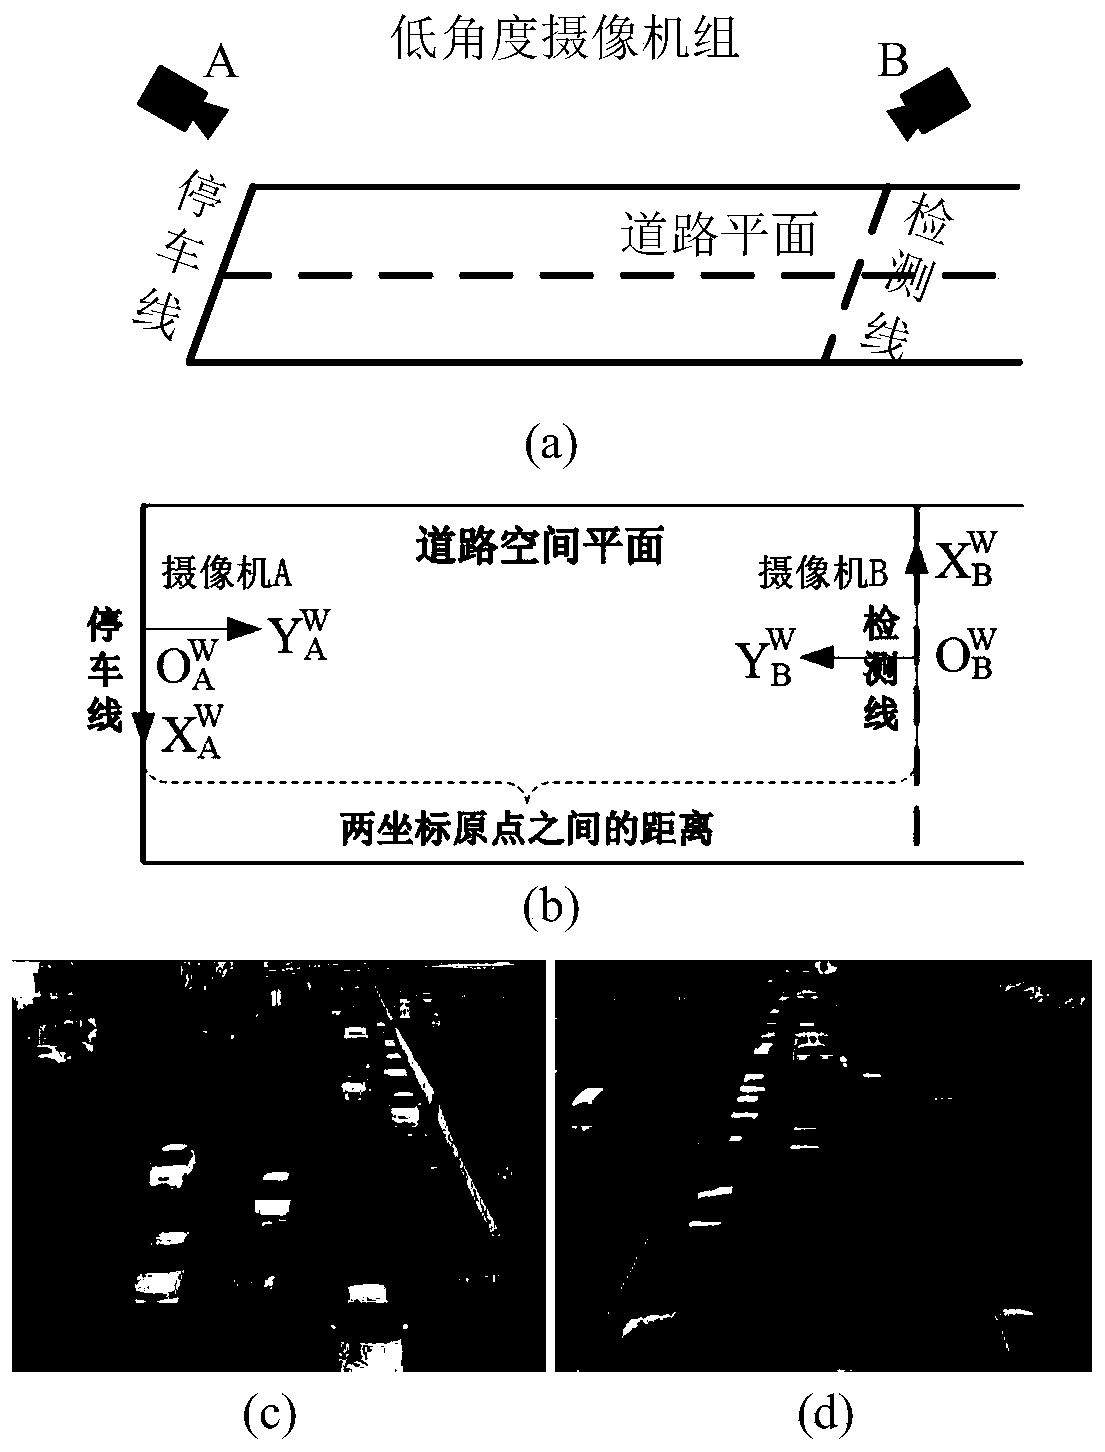 Intersection lane division detailed traffic parameter acquisition method based on double cameras